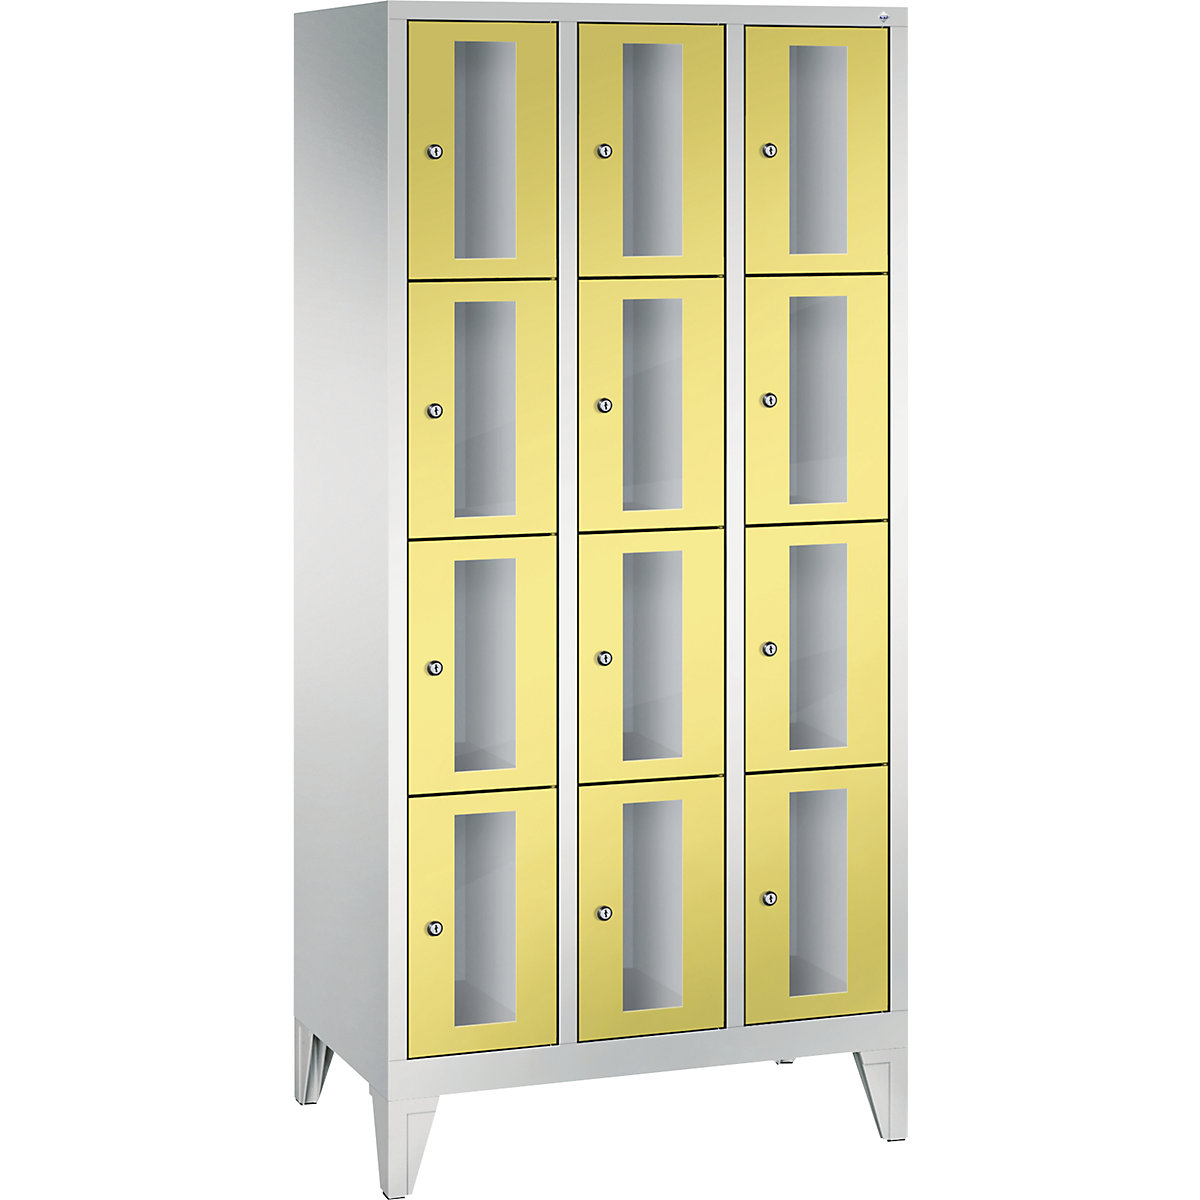 C+P – CLASSIC locker unit, compartment height 375 mm, with feet, 12 compartments, width 900 mm, sulphur yellow door